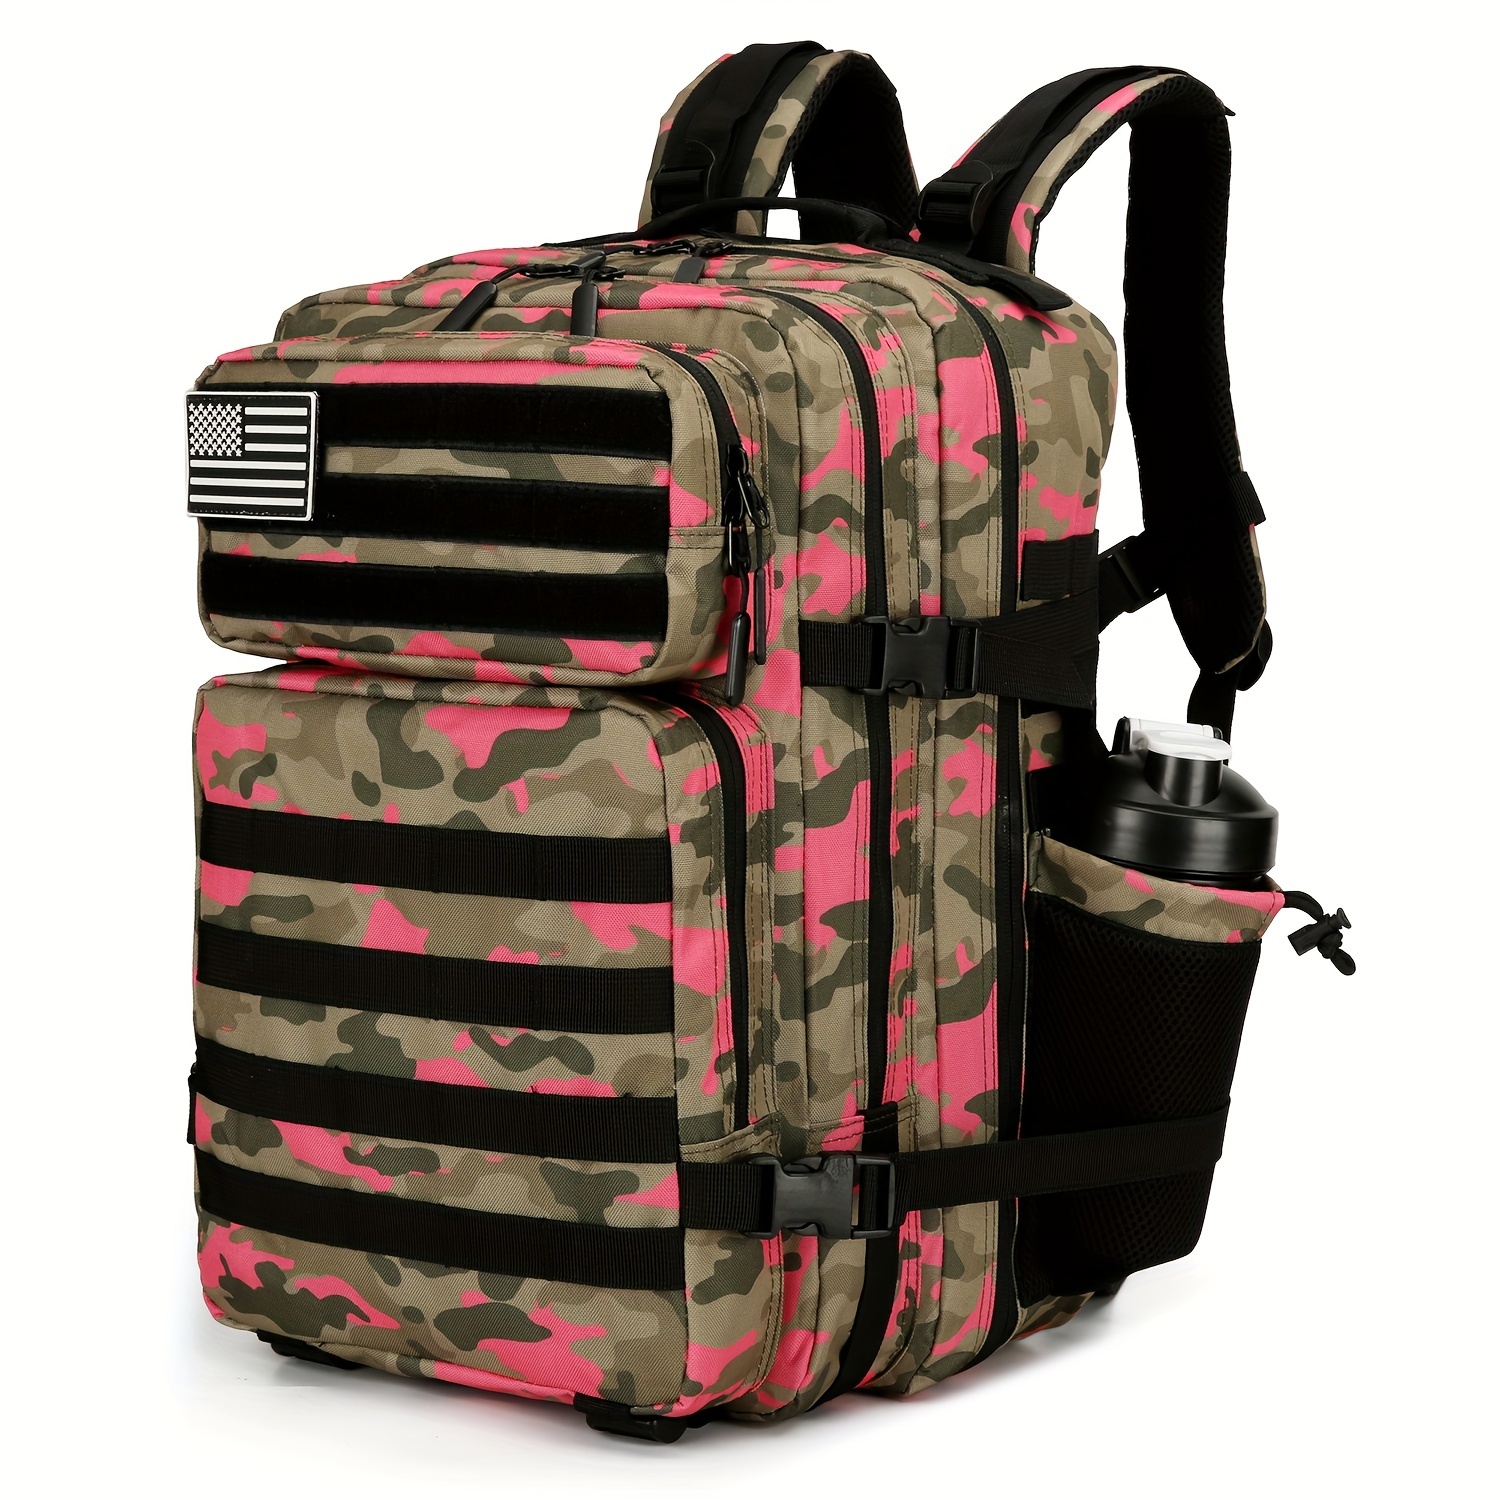 25l 45l Women's Backpack Outdoor Camping Equipment Pink Backpacks For Women  Tactical Military Bags Military Tactical Backpack - Outdoor Bags -  AliExpress